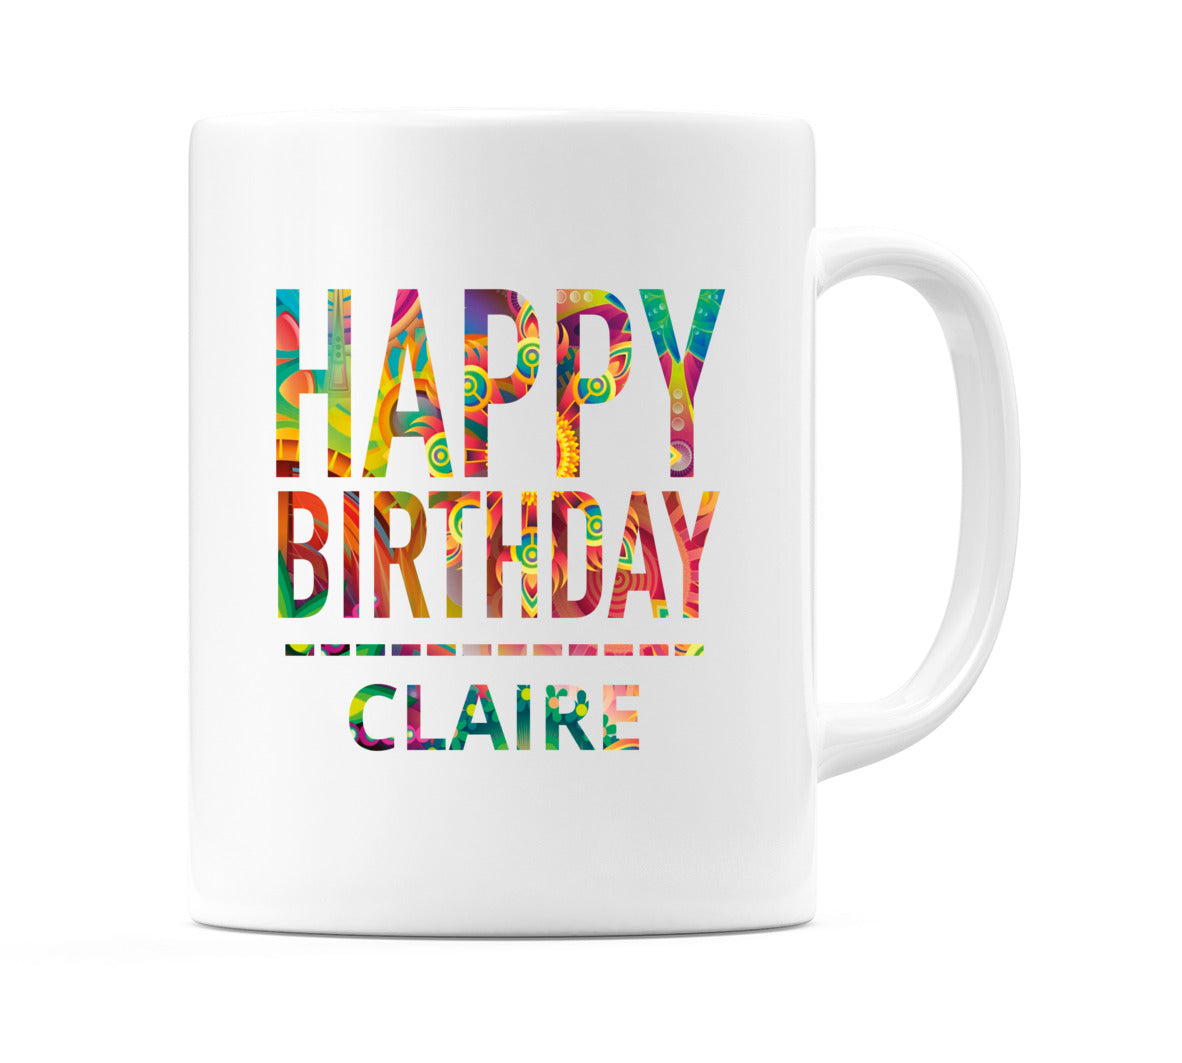 Happy Birthday Claire (Tie Dye Effect) Mug Cup by WeDoMugs